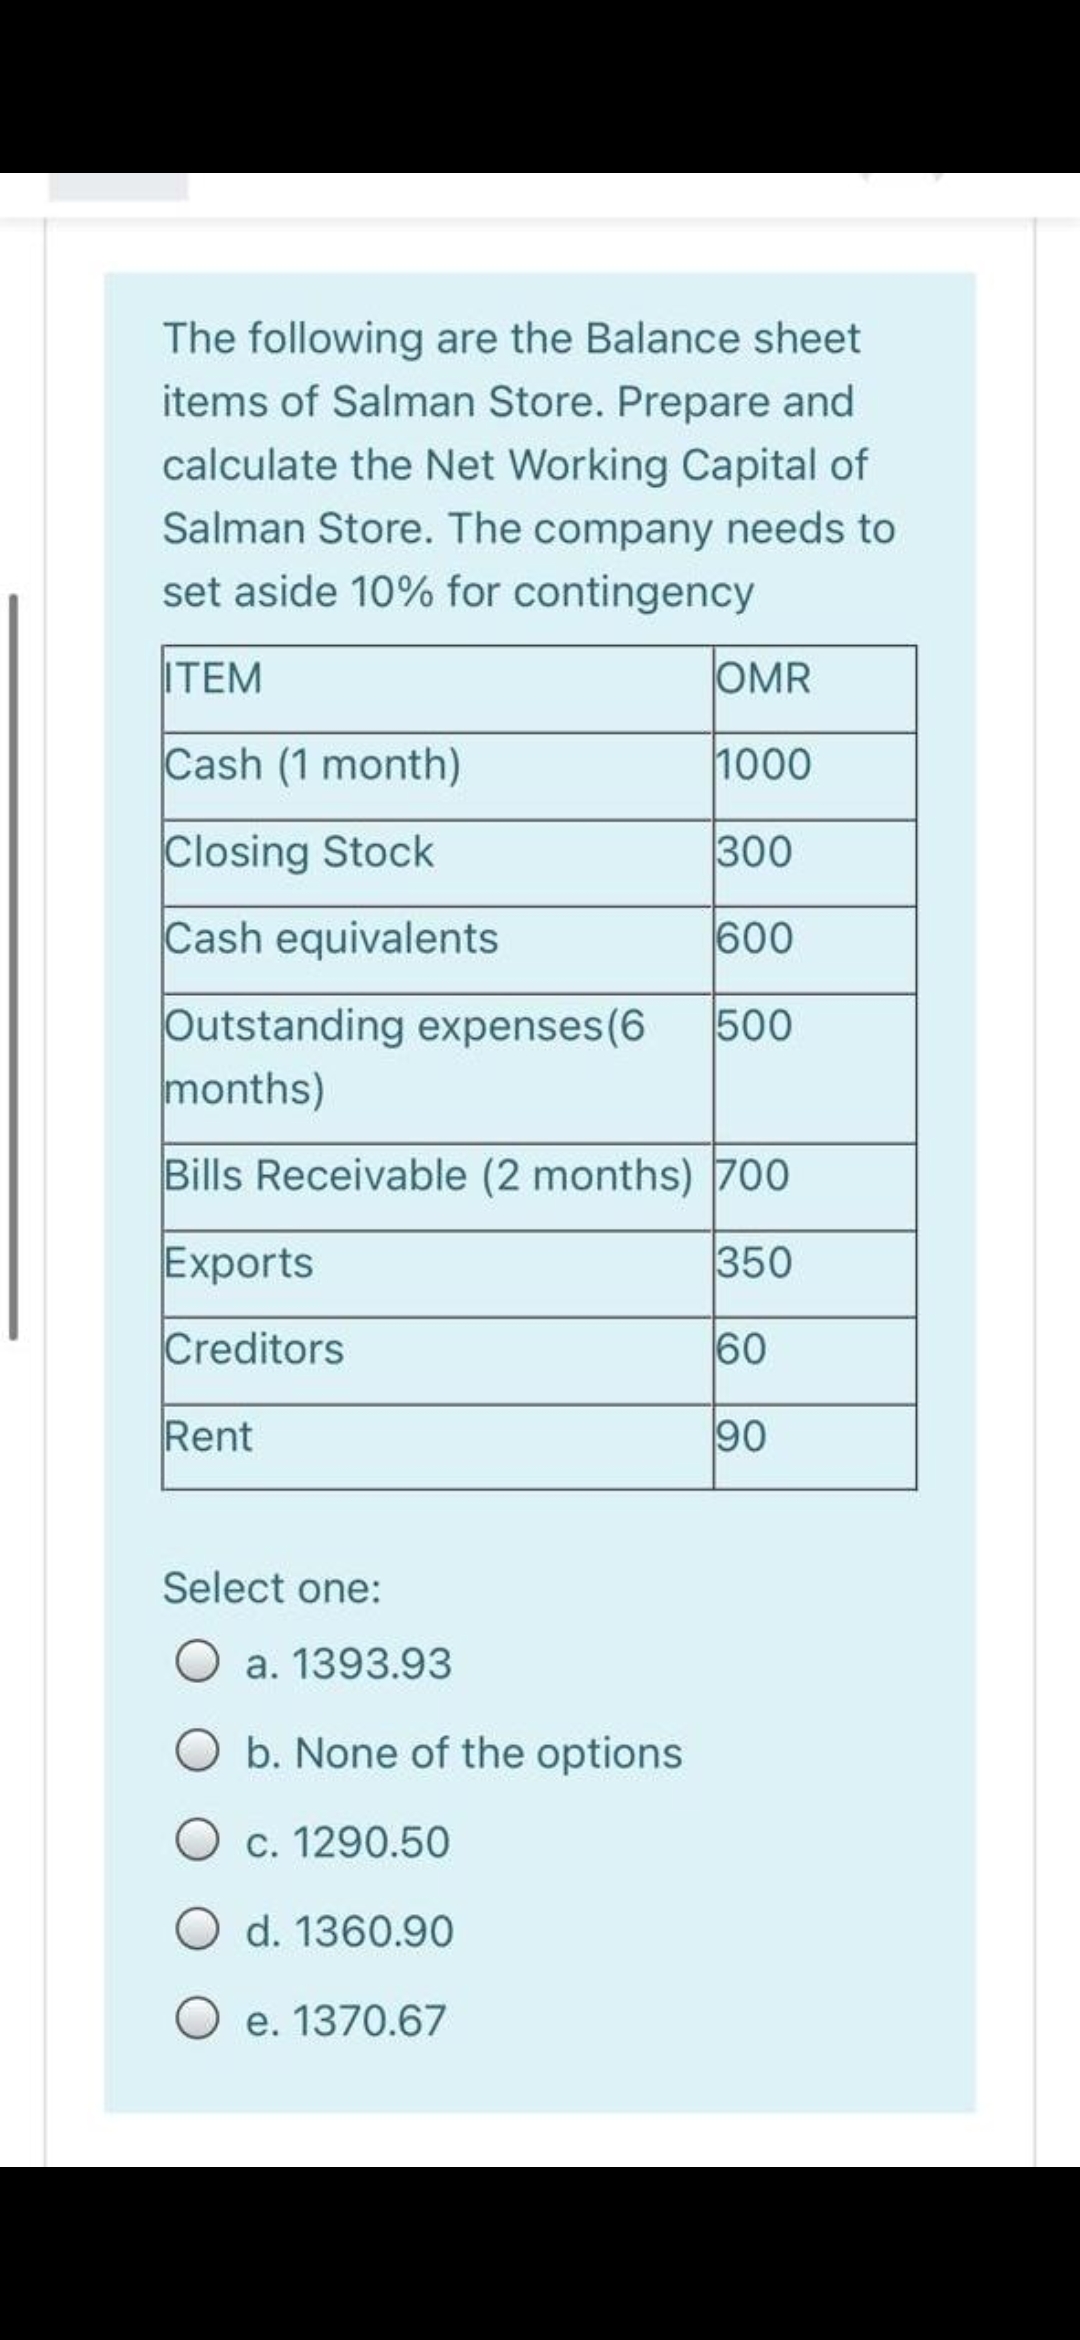 The following are the Balance sheet
items of Salman Store. Prepare and
calculate the Net Working Capital of
Salman Store. The company needs to
set aside 10% for contingency
ITEM
OMR
Cash (1 month)
1000
Closing Stock
300
Cash equivalents
600
Outstanding expenses(6
months)
500
Bills Receivable (2 months) 700
Exports
350
Creditors
60
Rent
90
Select one:
a. 1393.93
b. None of the options
O c. 1290.50
O d. 1360.90
O e. 1370.67
